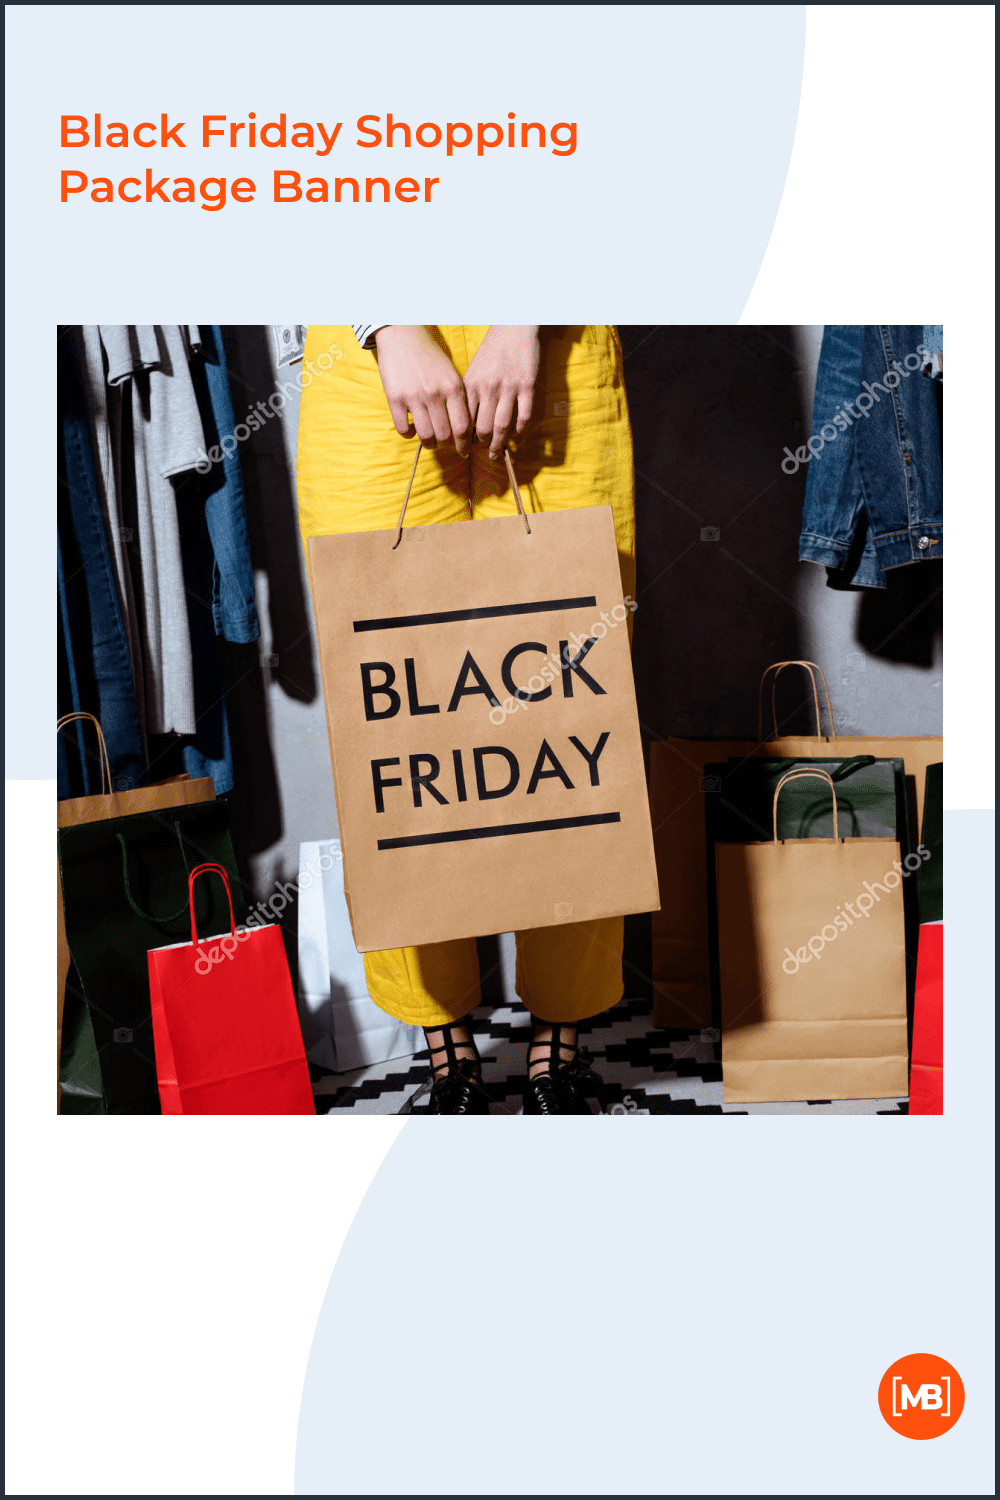 Illustration for Black Friday commercial purposes.